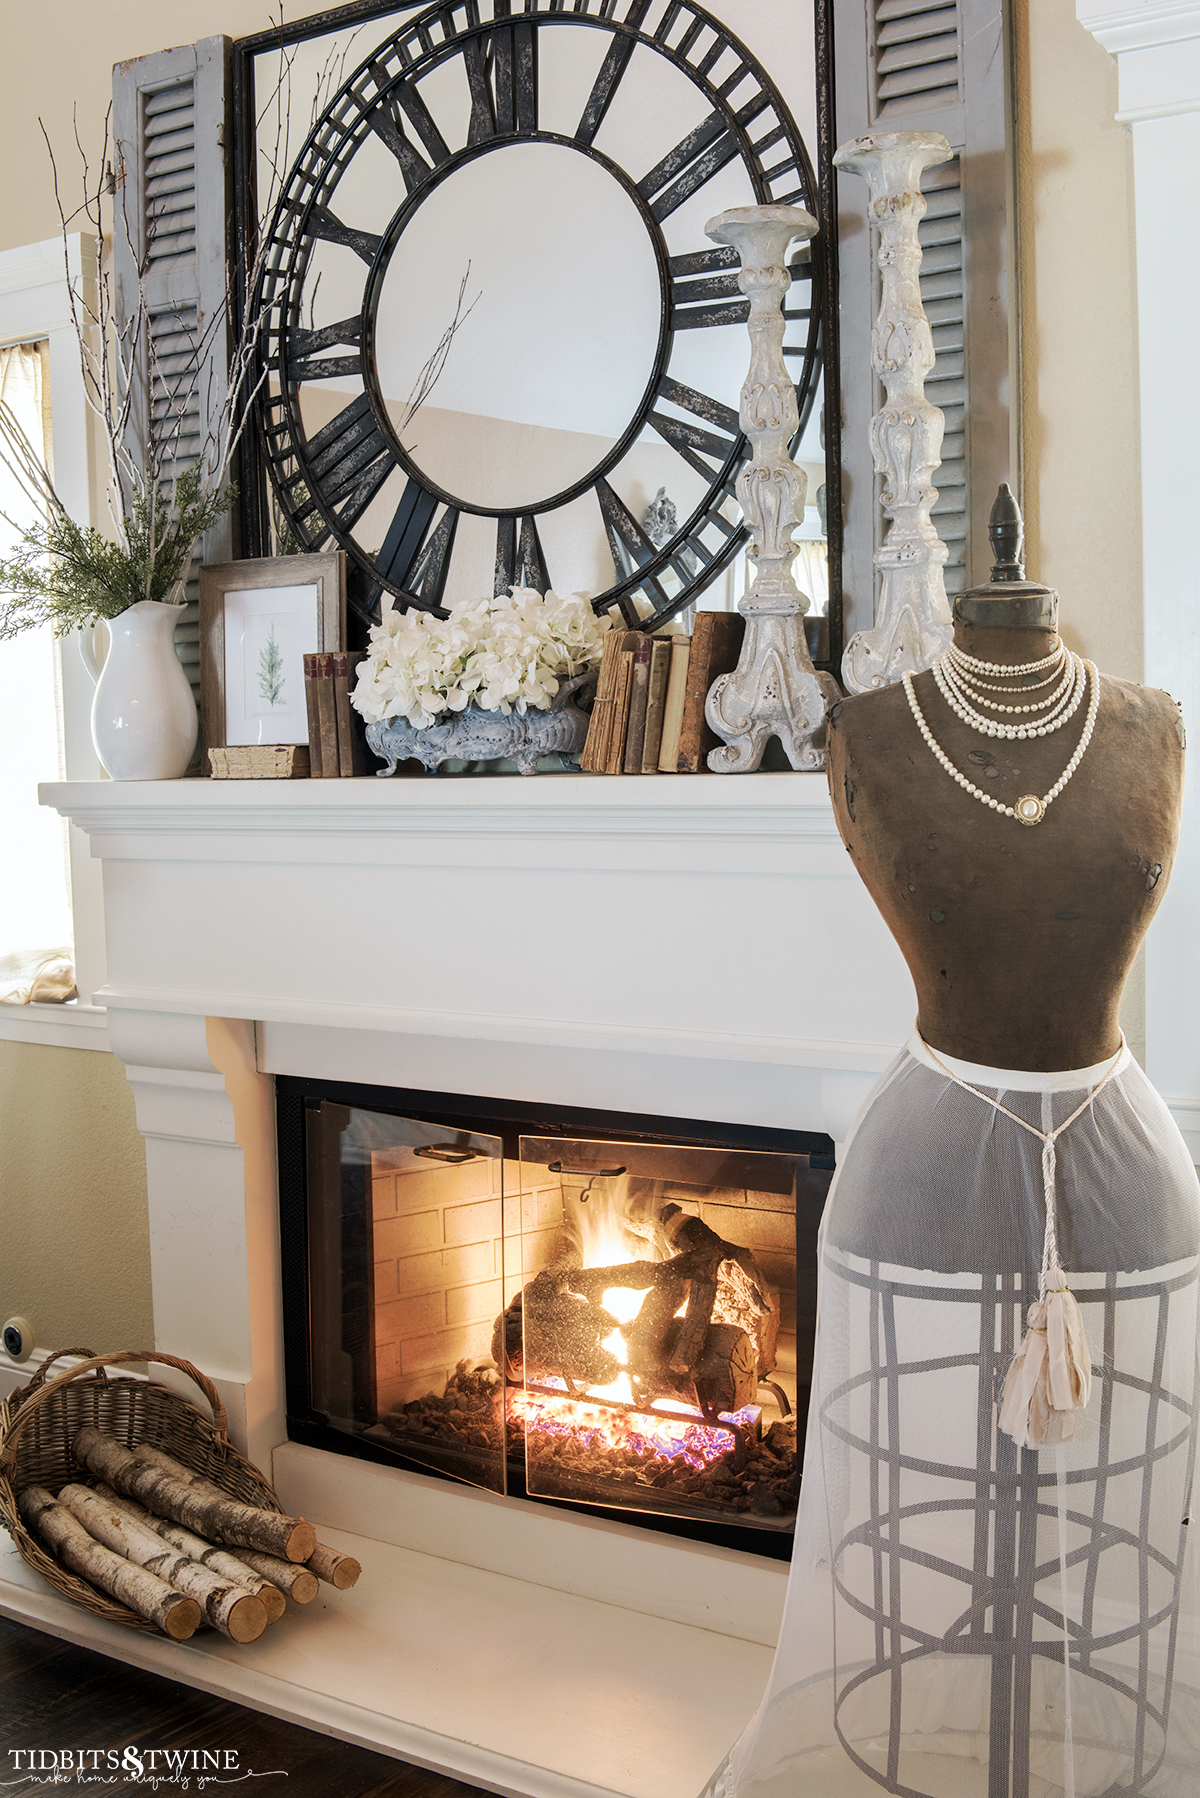 bedroom fireplace with french dress form in front of winter decorated mantel with mirror above and candlesticks and books on mantel